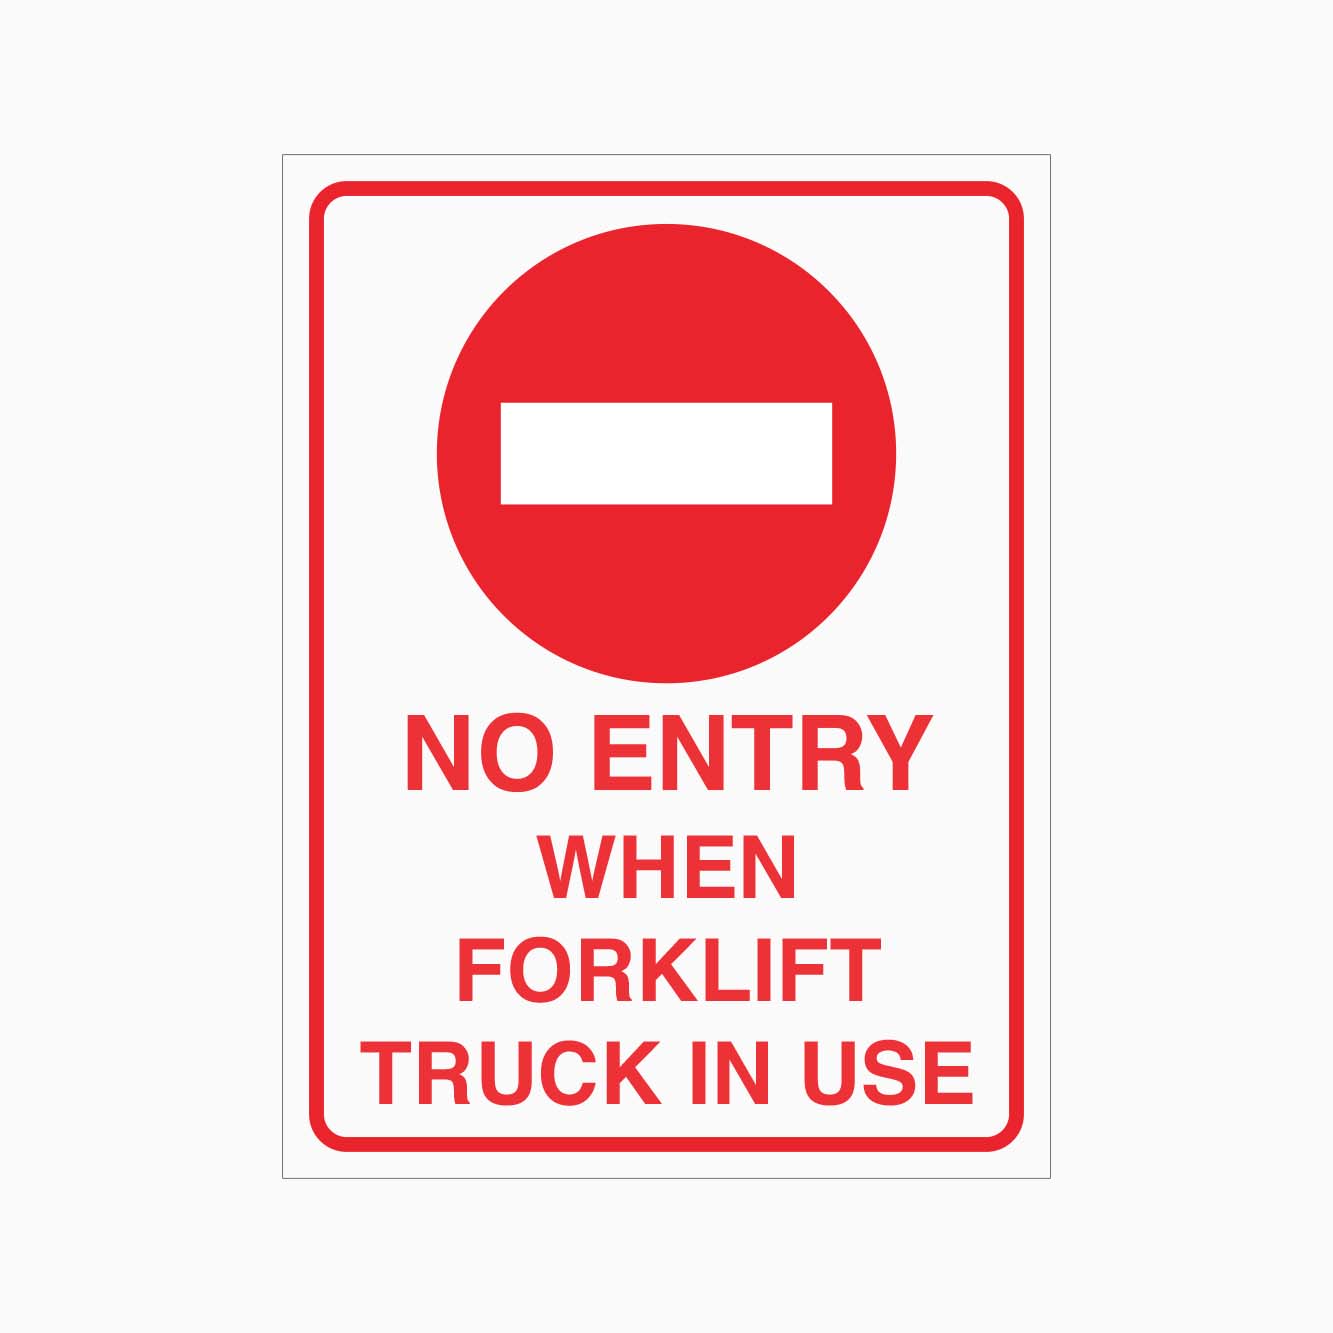 NO ENTRY WHEN FORKLIFT TRUCK IN USE SIGN - GET SIGNS